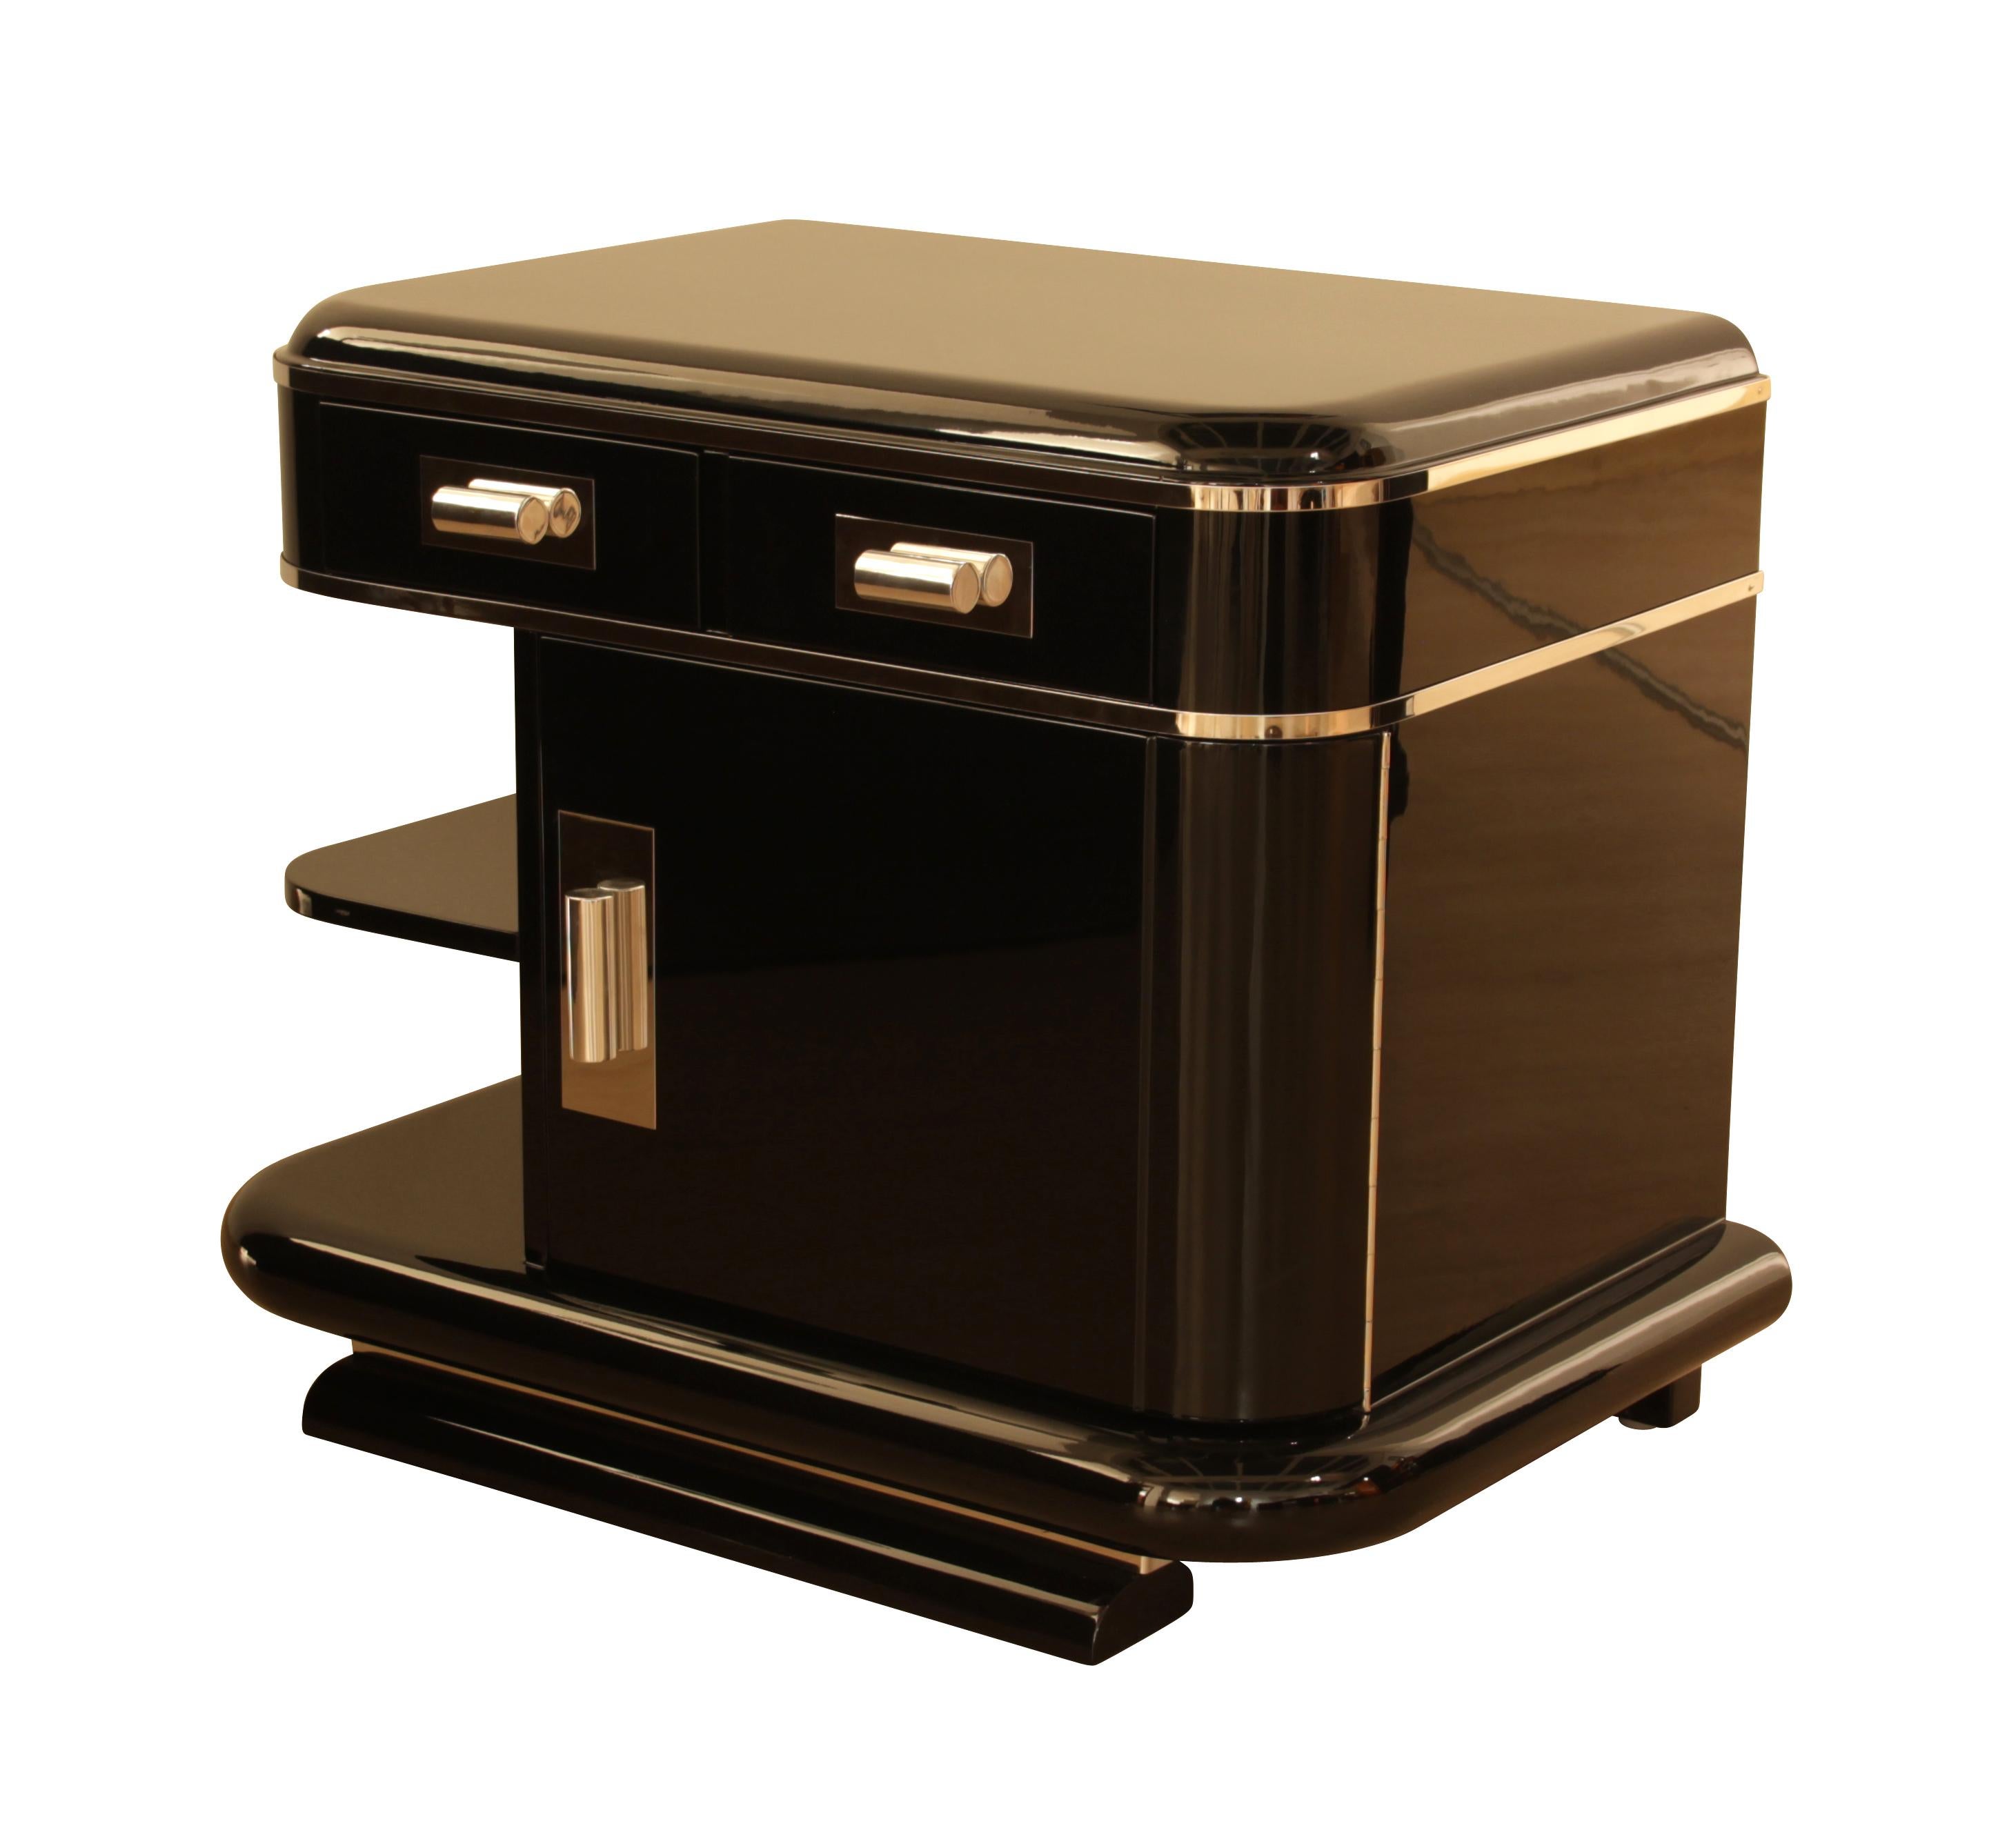 Wonderful pair of elegant Art Deco nightstands or bedside tables.

2 drawers, 1 door and 2 open shelves.

The walnut wood has been elaborately lacquered and polished in black (piano lacquer).

On the inside it is walnut veneered and also